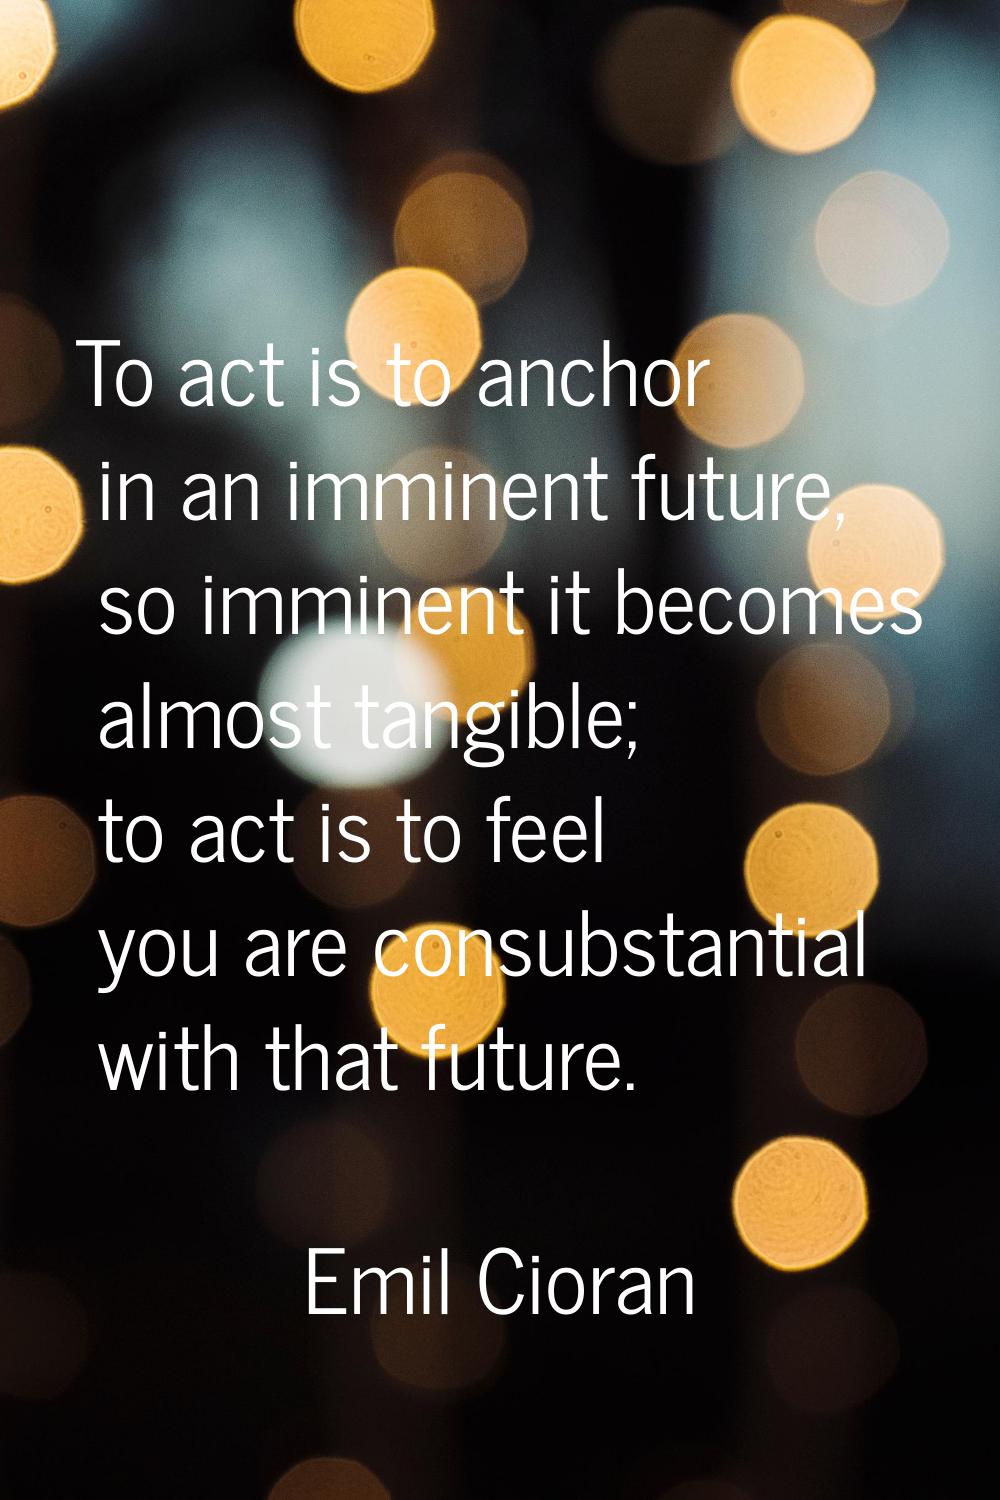 To act is to anchor in an imminent future, so imminent it becomes almost tangible; to act is to fee